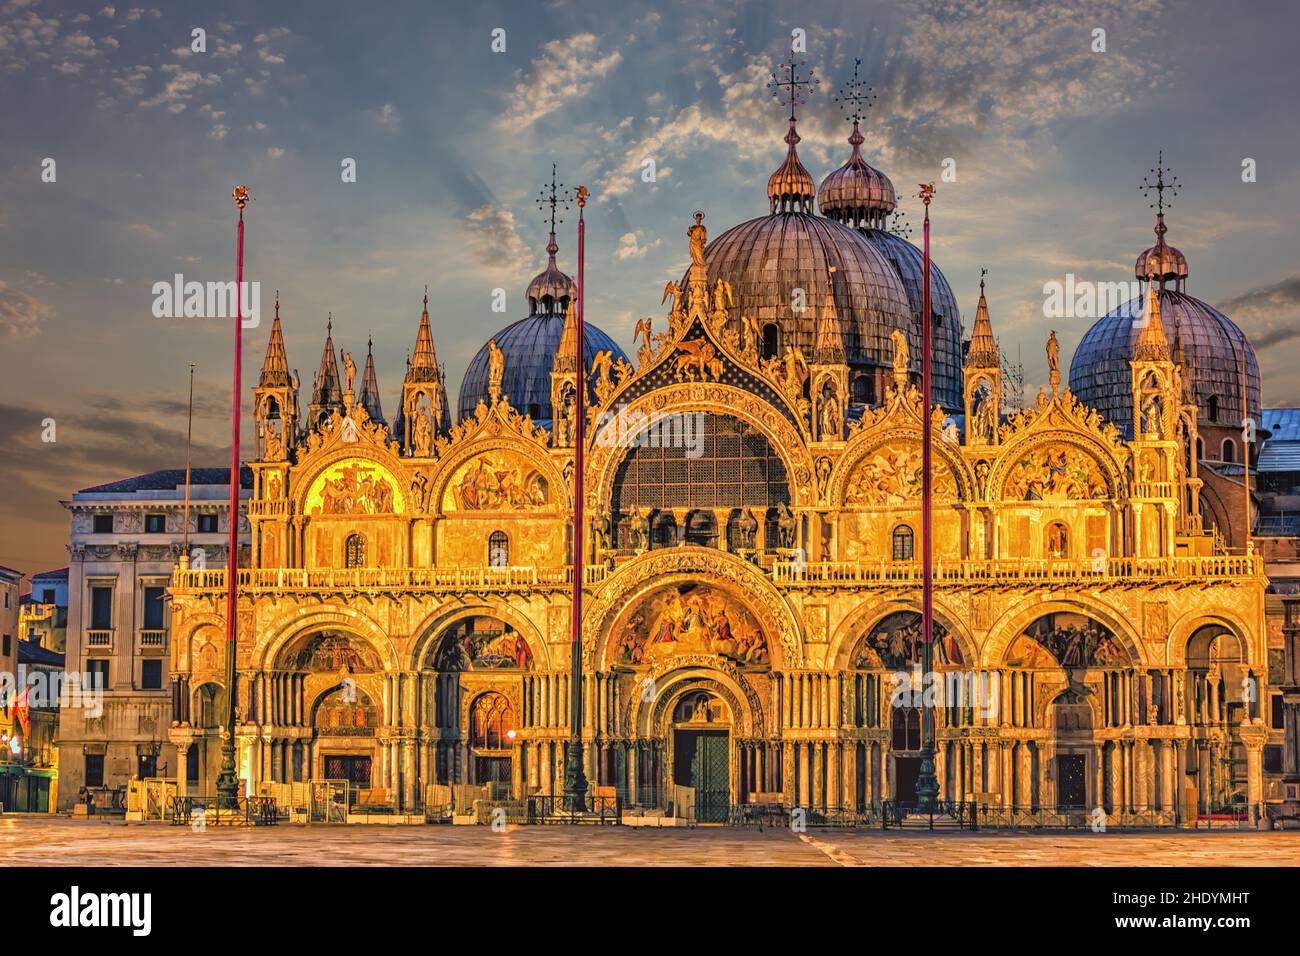 venice, st mark's cathedral, venices, st. mark's cathedrals Stock Photo